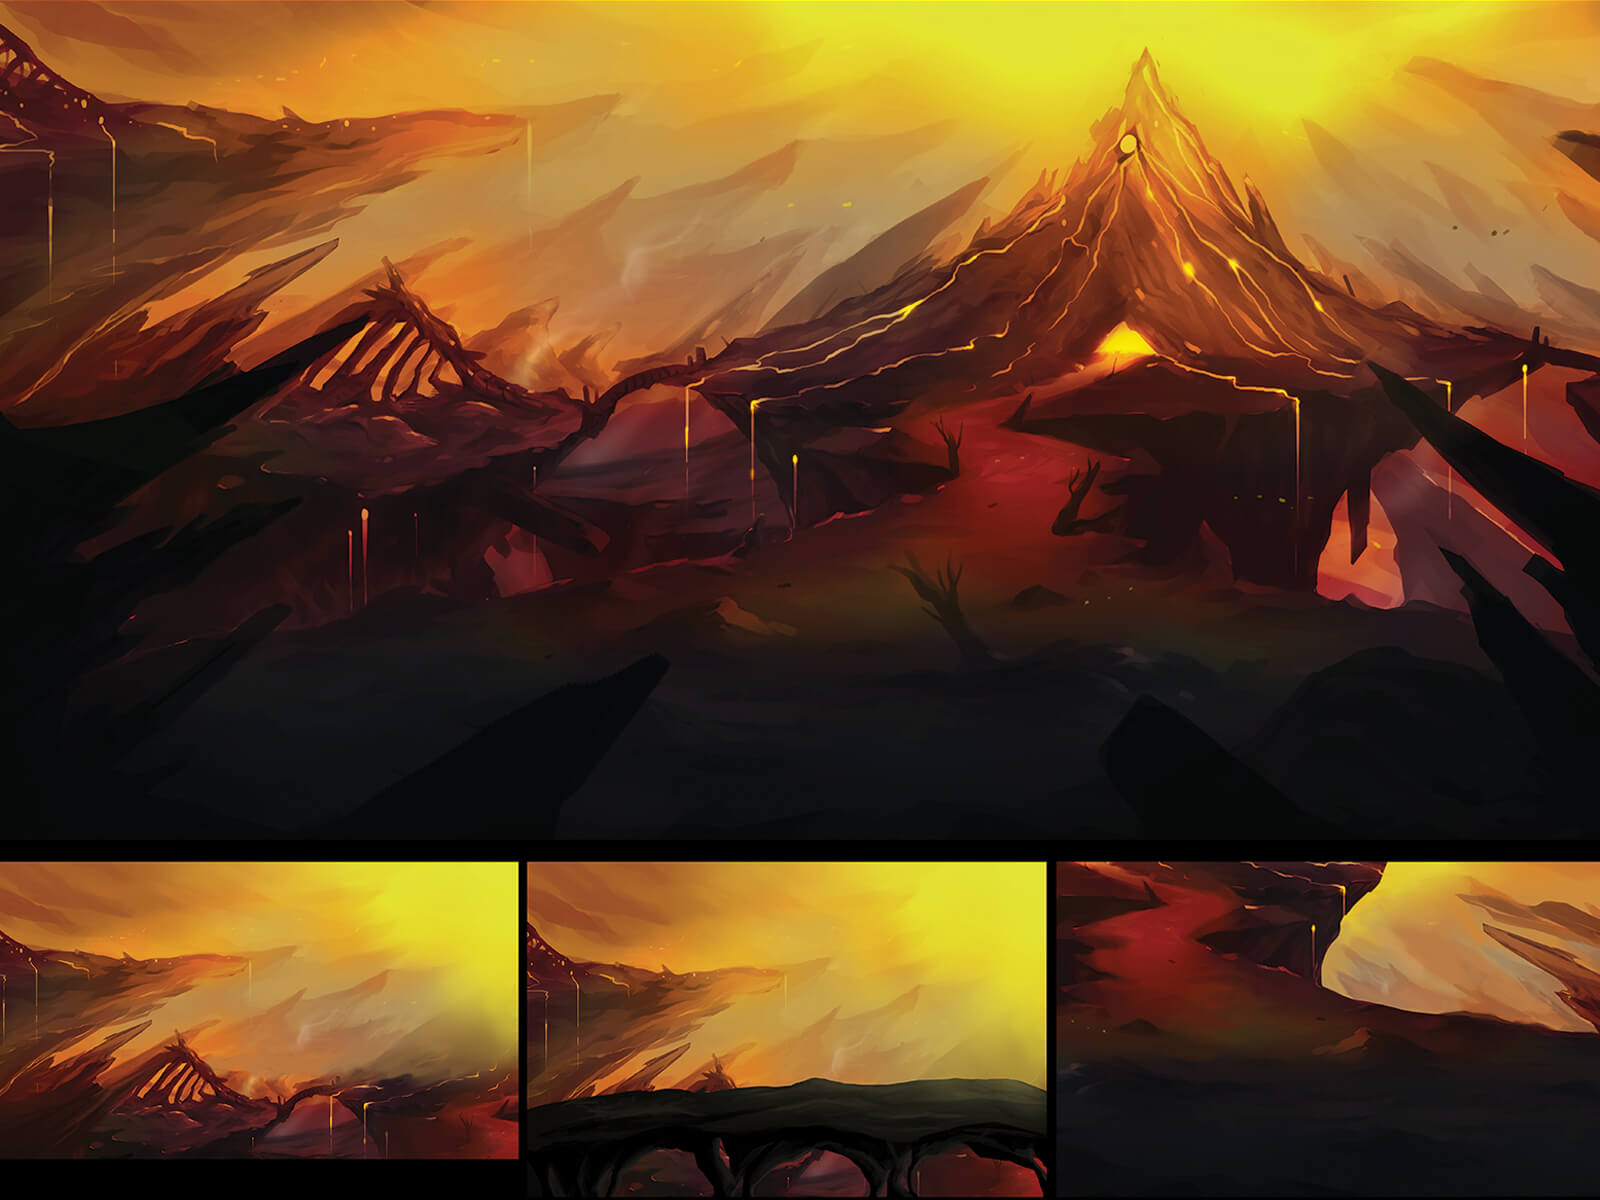 Concept art of landscape in a mountainous area devastated by an active, spewing volcano, the scene's only source of light.